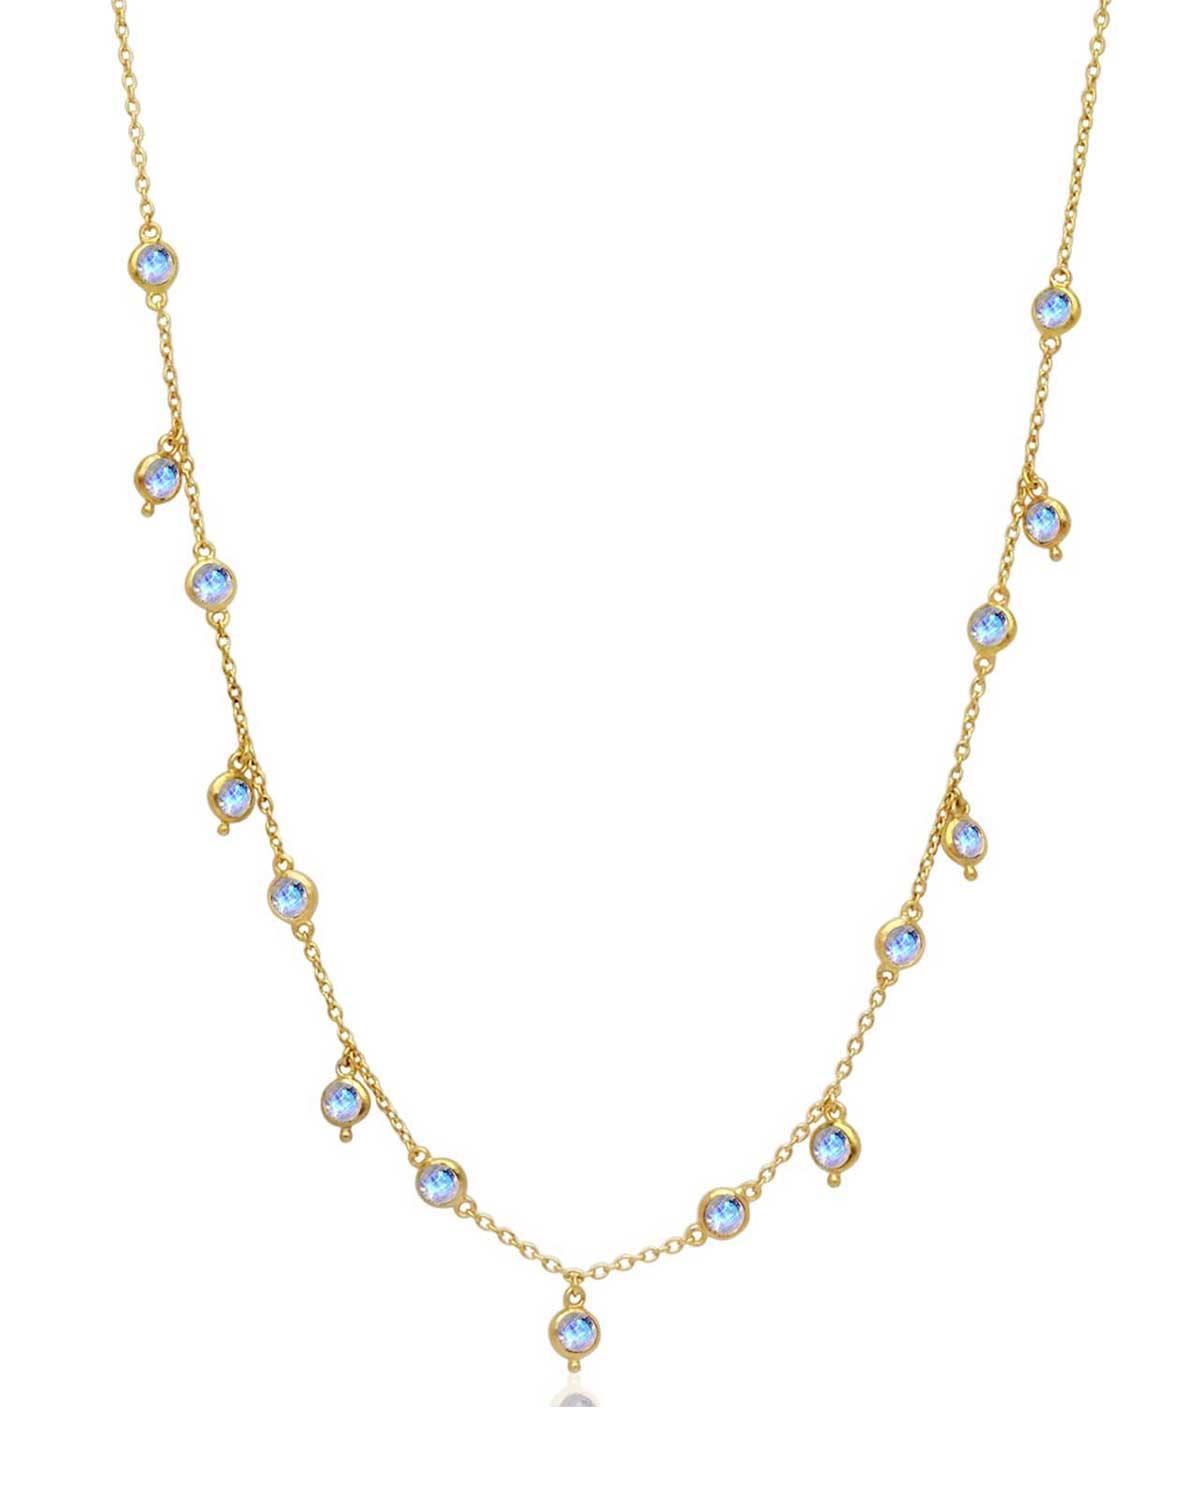 Contemporary Moonstone Gold Necklace - Moon London